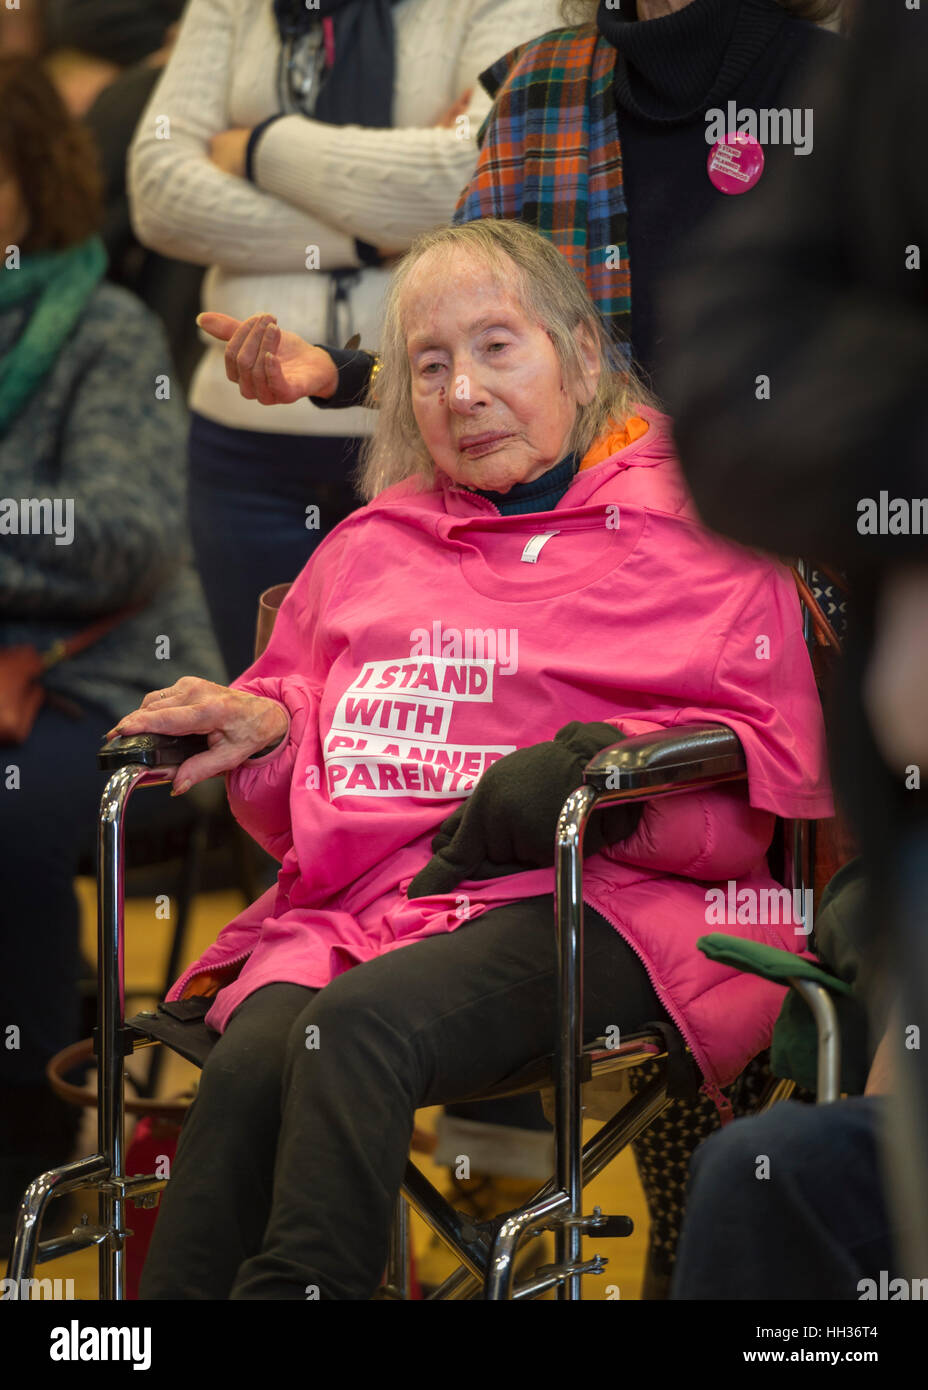 New York, USA. 15th Jan, 2017. In wheelchair, Pearl Berger, 97, of Amityville, who has breast cancer and Parkinson's Disease, has an "I STAND WITH PLANNED PARENTHOOD" pink shirt draped on her chest, at the "Our First Stand" Rally against Republicans repealing the Affordable Care Act, ACA, taking millions of people off health insurance, making massive cuts to Medicaid, and defunding Planned Parenthood. Credit: Ann E Parry/Alamy Live News Stock Photo